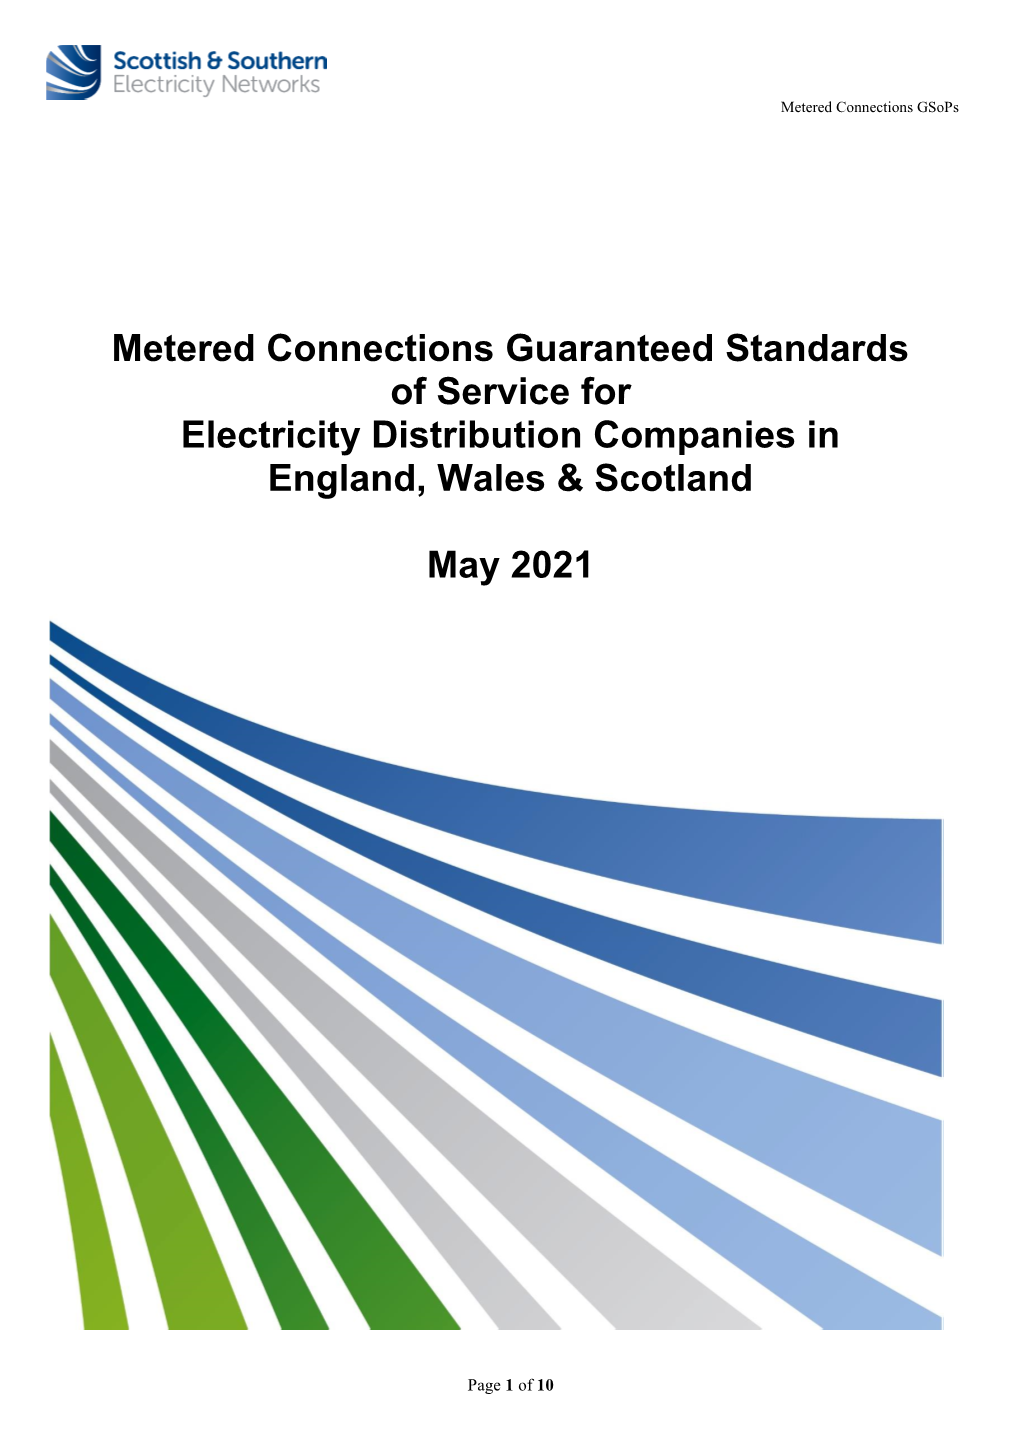 Metered Connections Guaranteed Standards of Service for Electricity Distribution Companies in England, Wales & Scotland